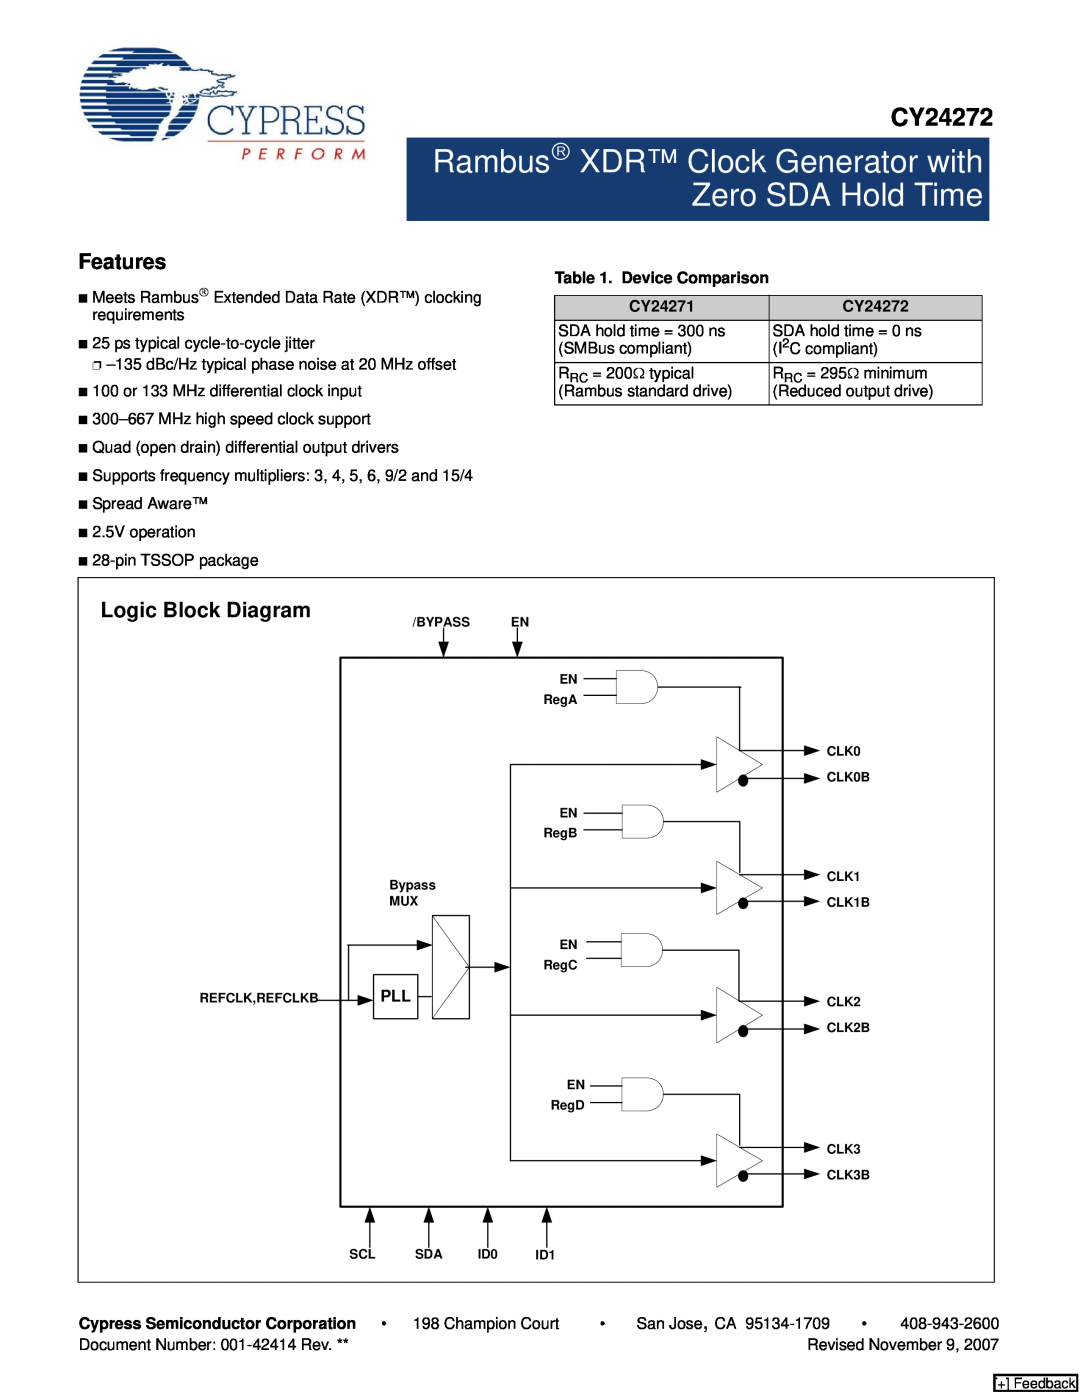 Cypress CY24271 manual CY24272, Features, Logic Block Diagram, Rambus→ XDR Clock Generator with Zero SDA Hold Time 